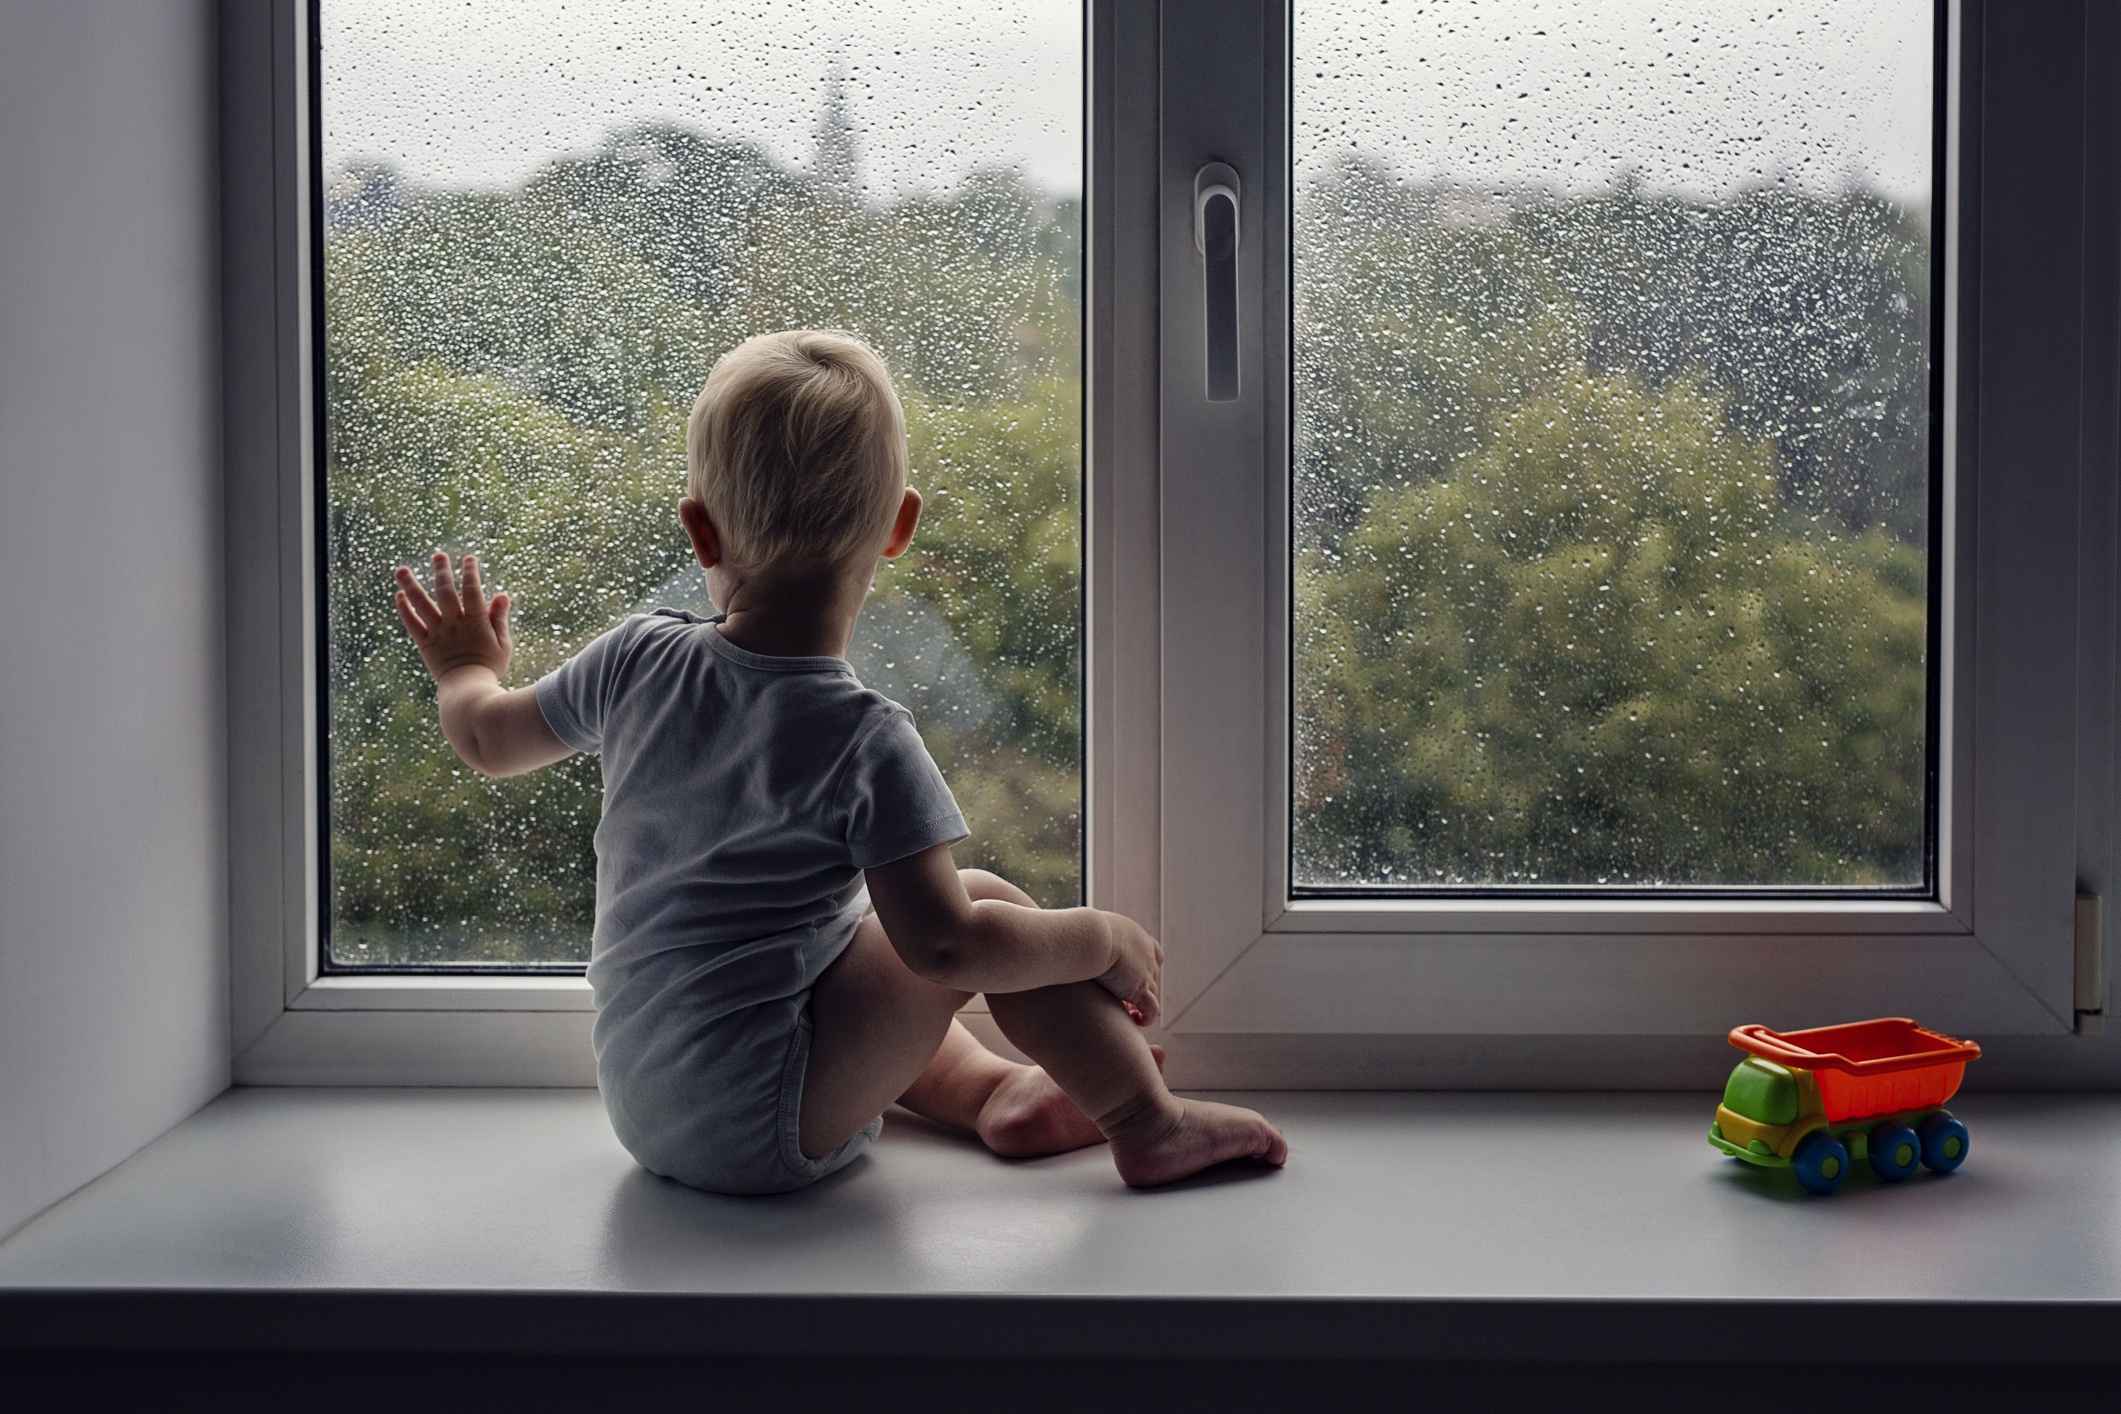 Infant boy sitting on a windowsill with his hand against the glass window with rain drops